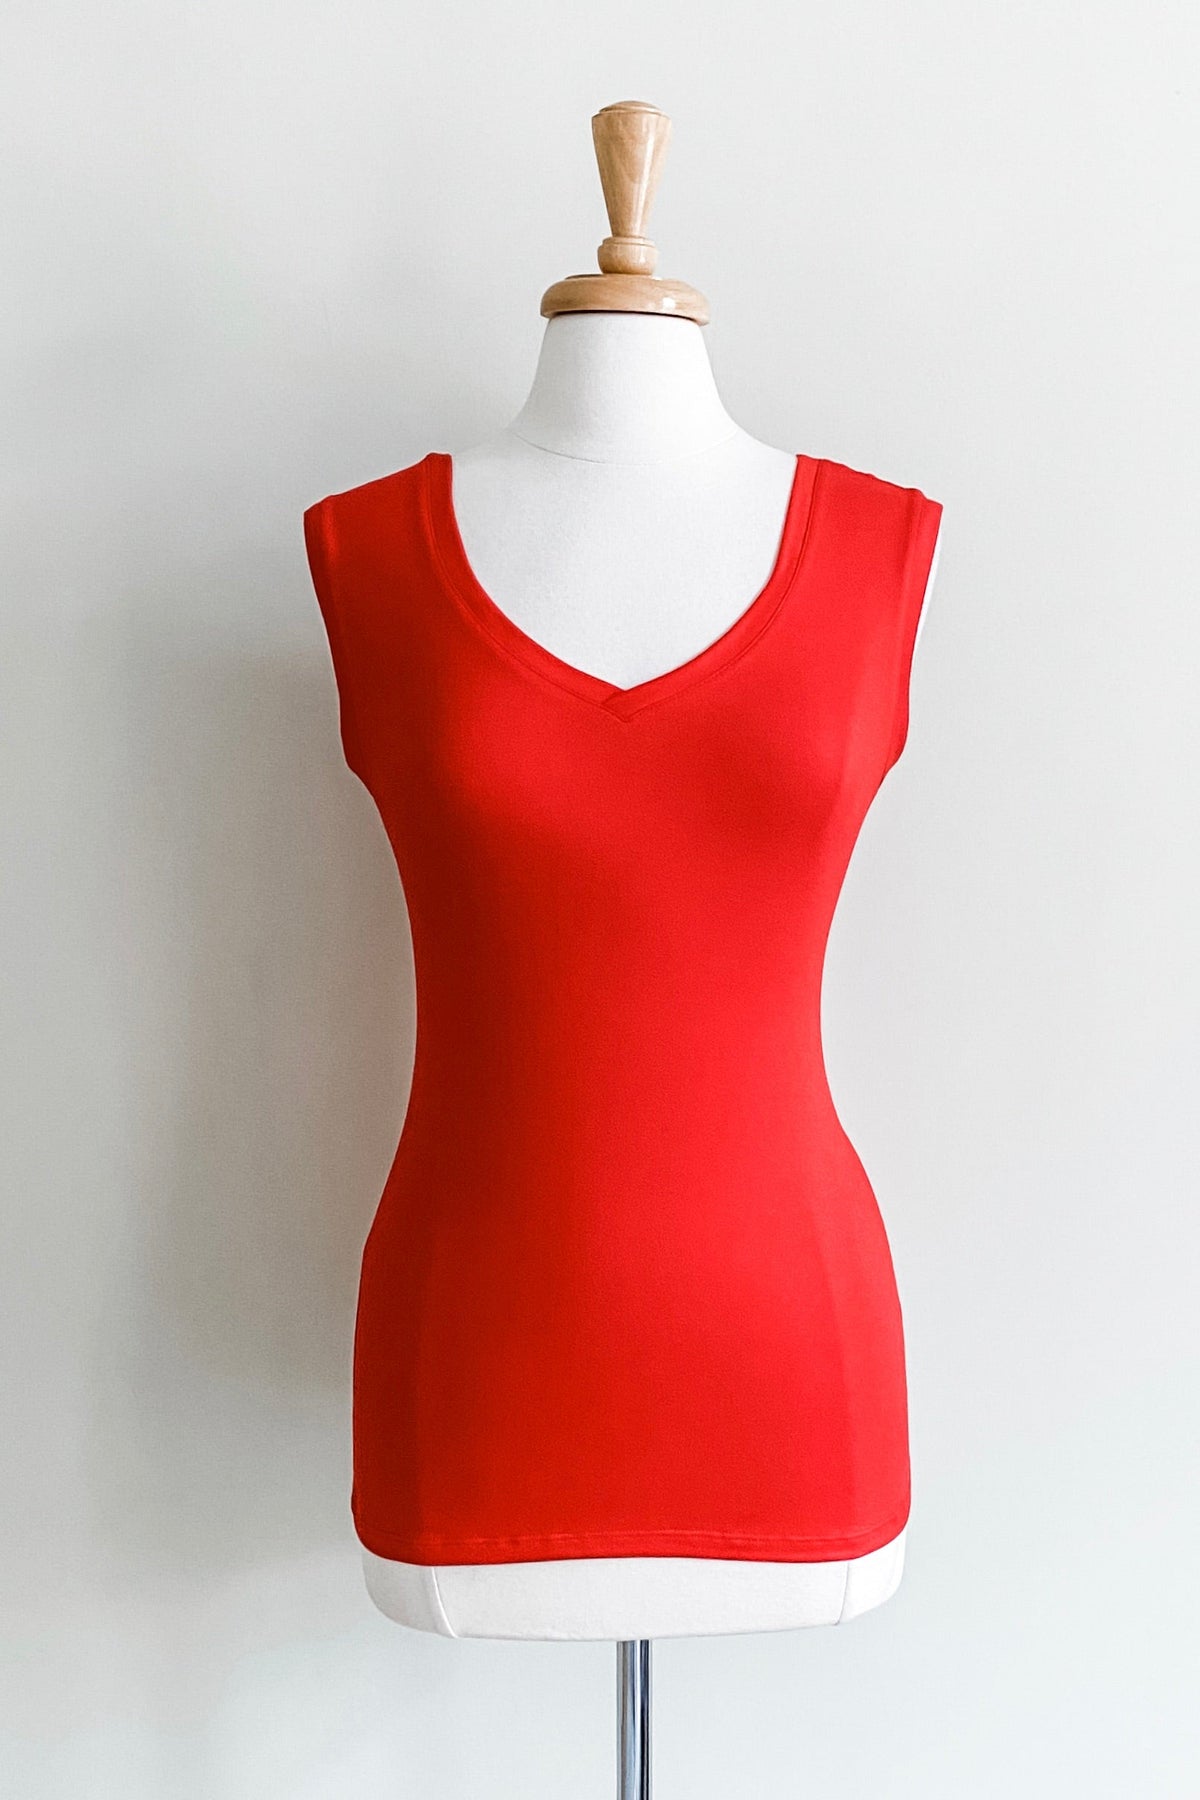 Convertible Cami Top in Fire Red colour